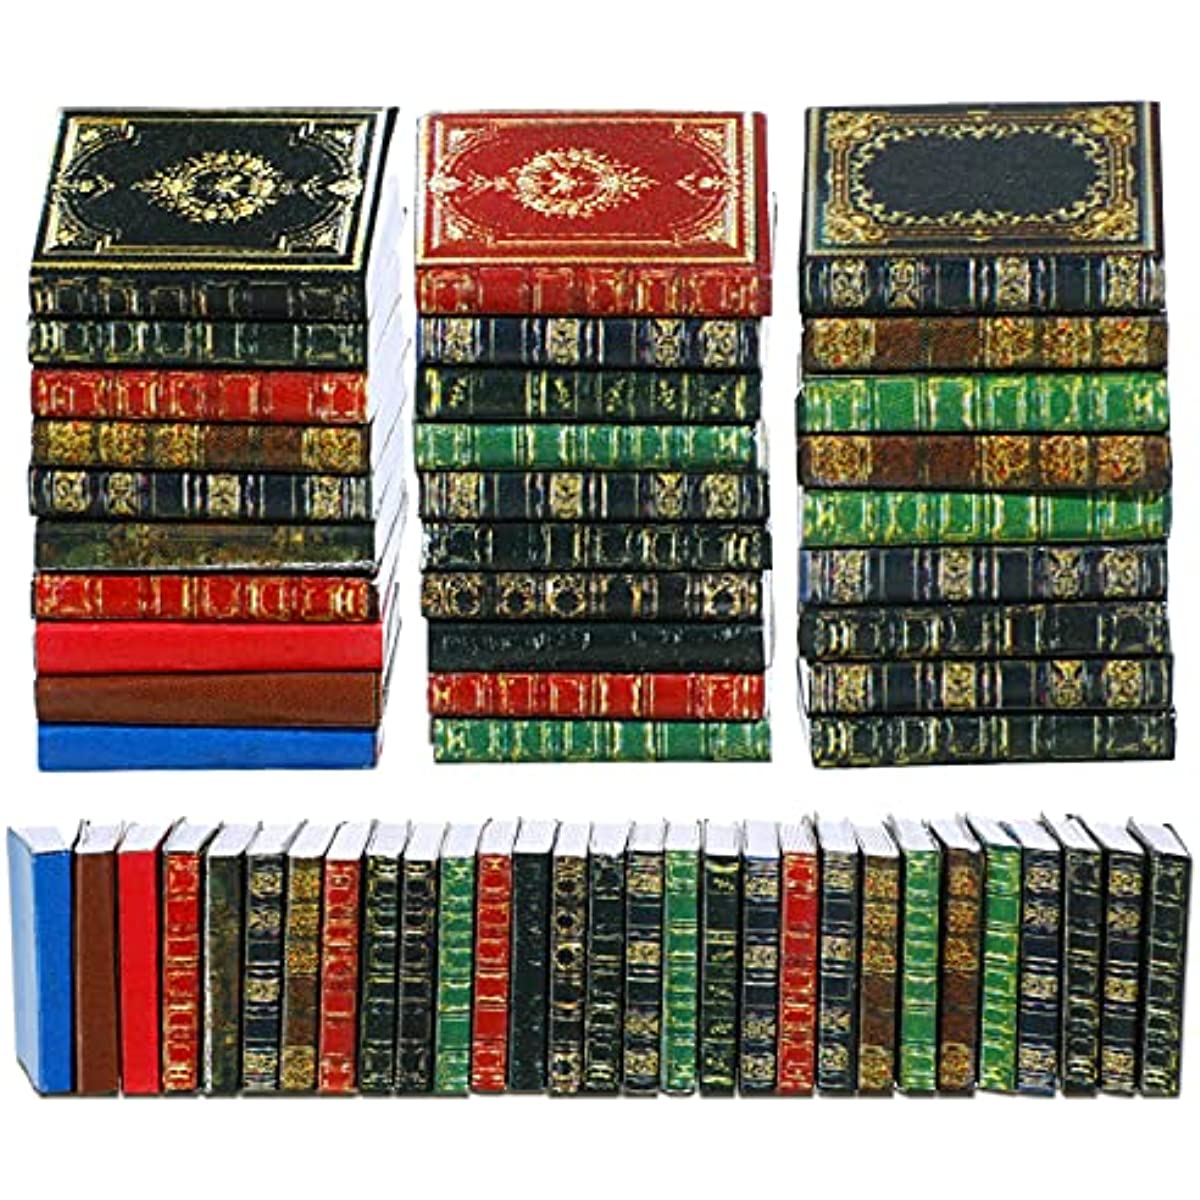  30 Pieces 1:12 Scale Miniatures Dollhouse Books Assorted  Timeless Miniatures Books Mini Books Model Miniature Dollhouse Accessories  Toy Supplies for Boys Girls Valentine's Day(Vintage Style) : Toys & Games